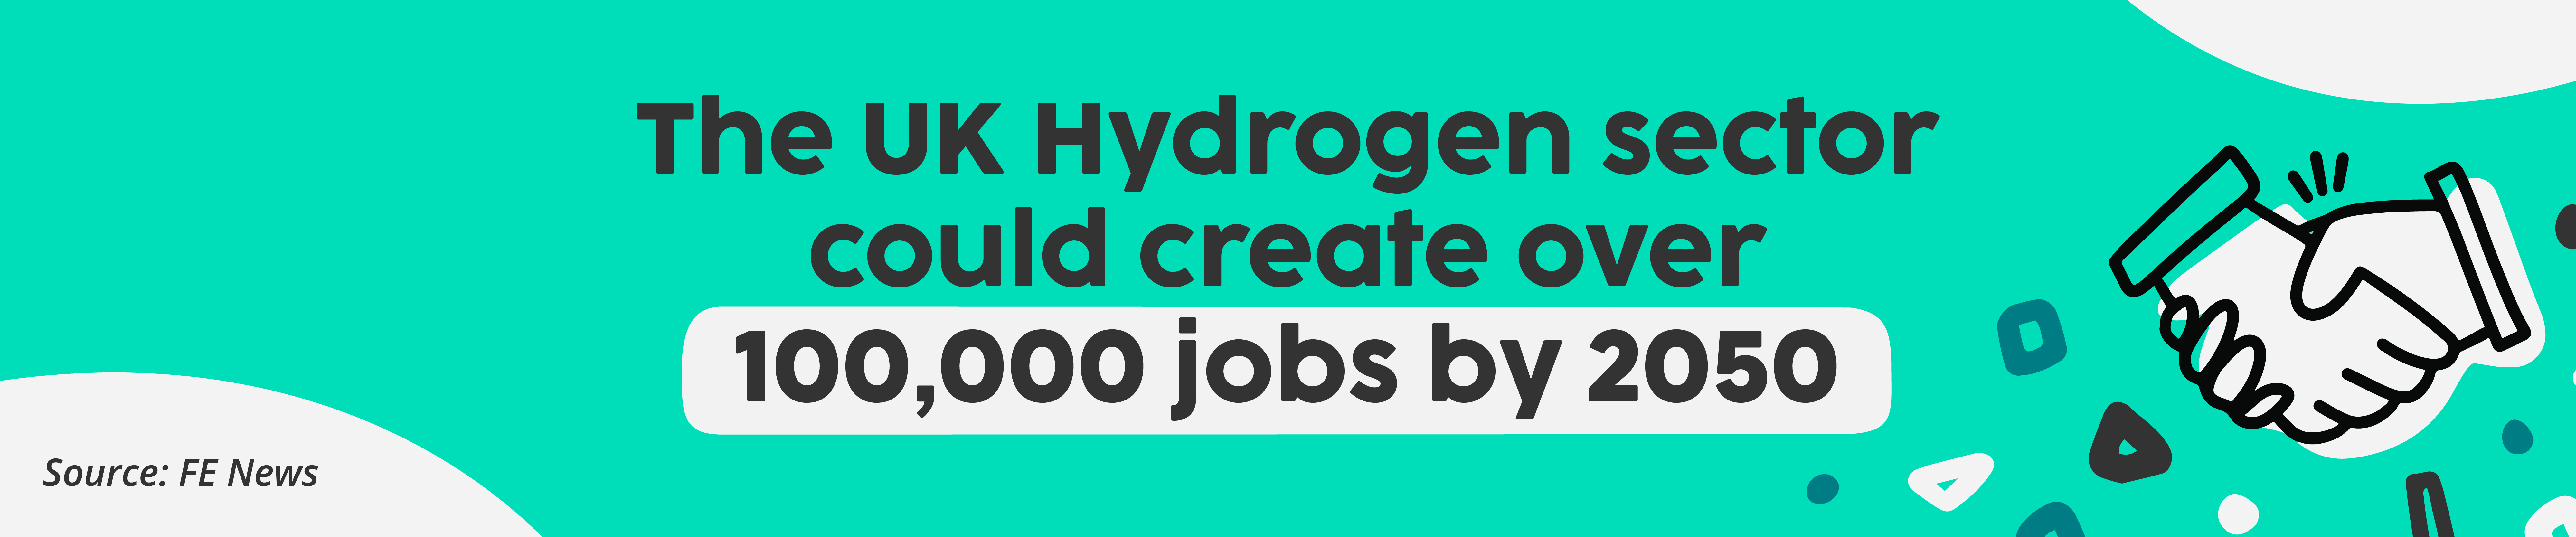 Hydrogen sector could create over 100,000 jobs in the UK by 2050